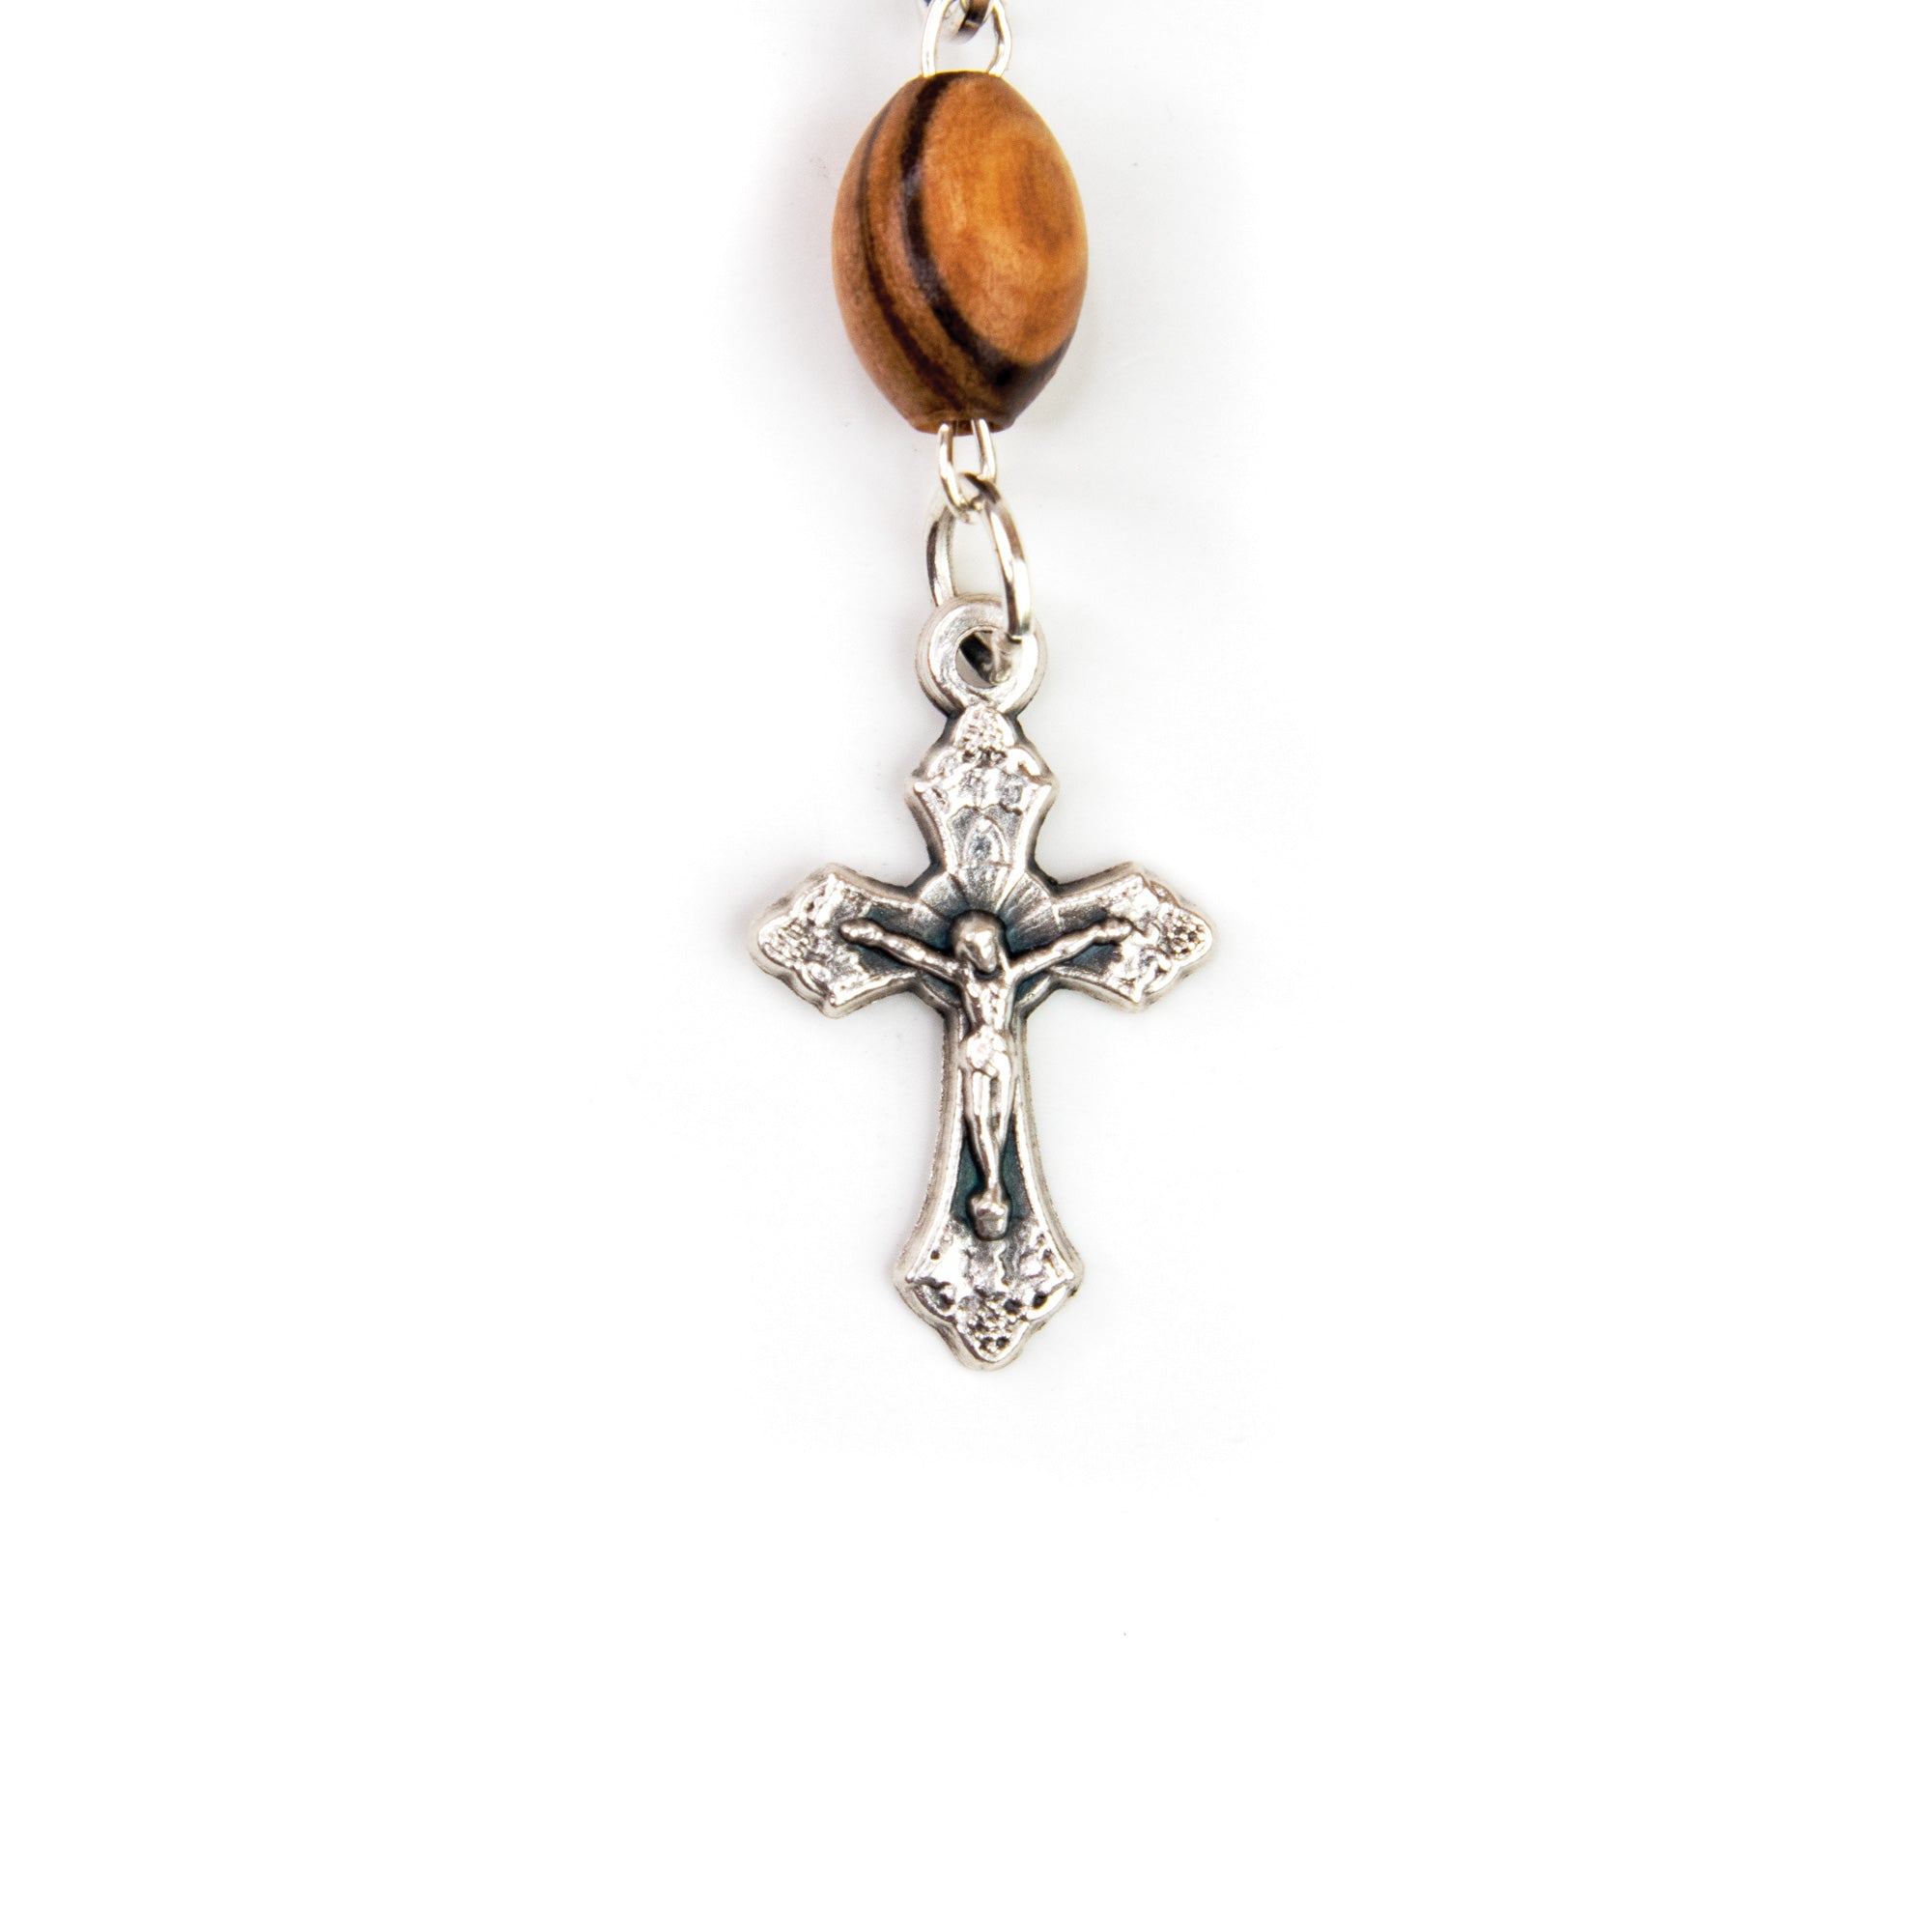 Mother Mary and Child Jesus, Holy Land Olive Wood Pocket Auto Rosary, Made in Bethlehem